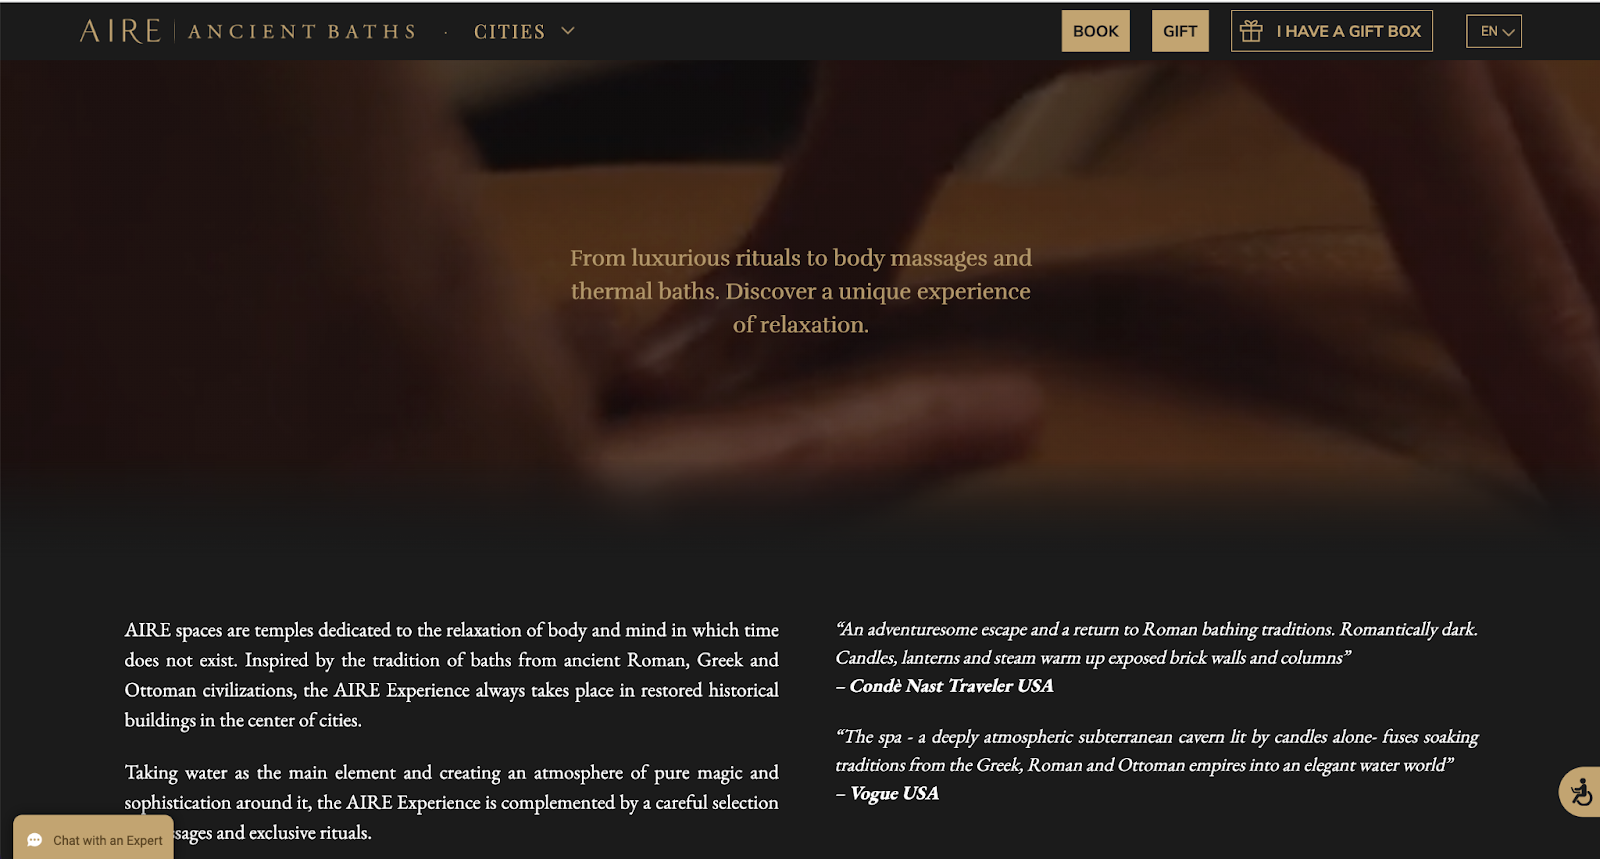 spa website examples, aire ancient baths